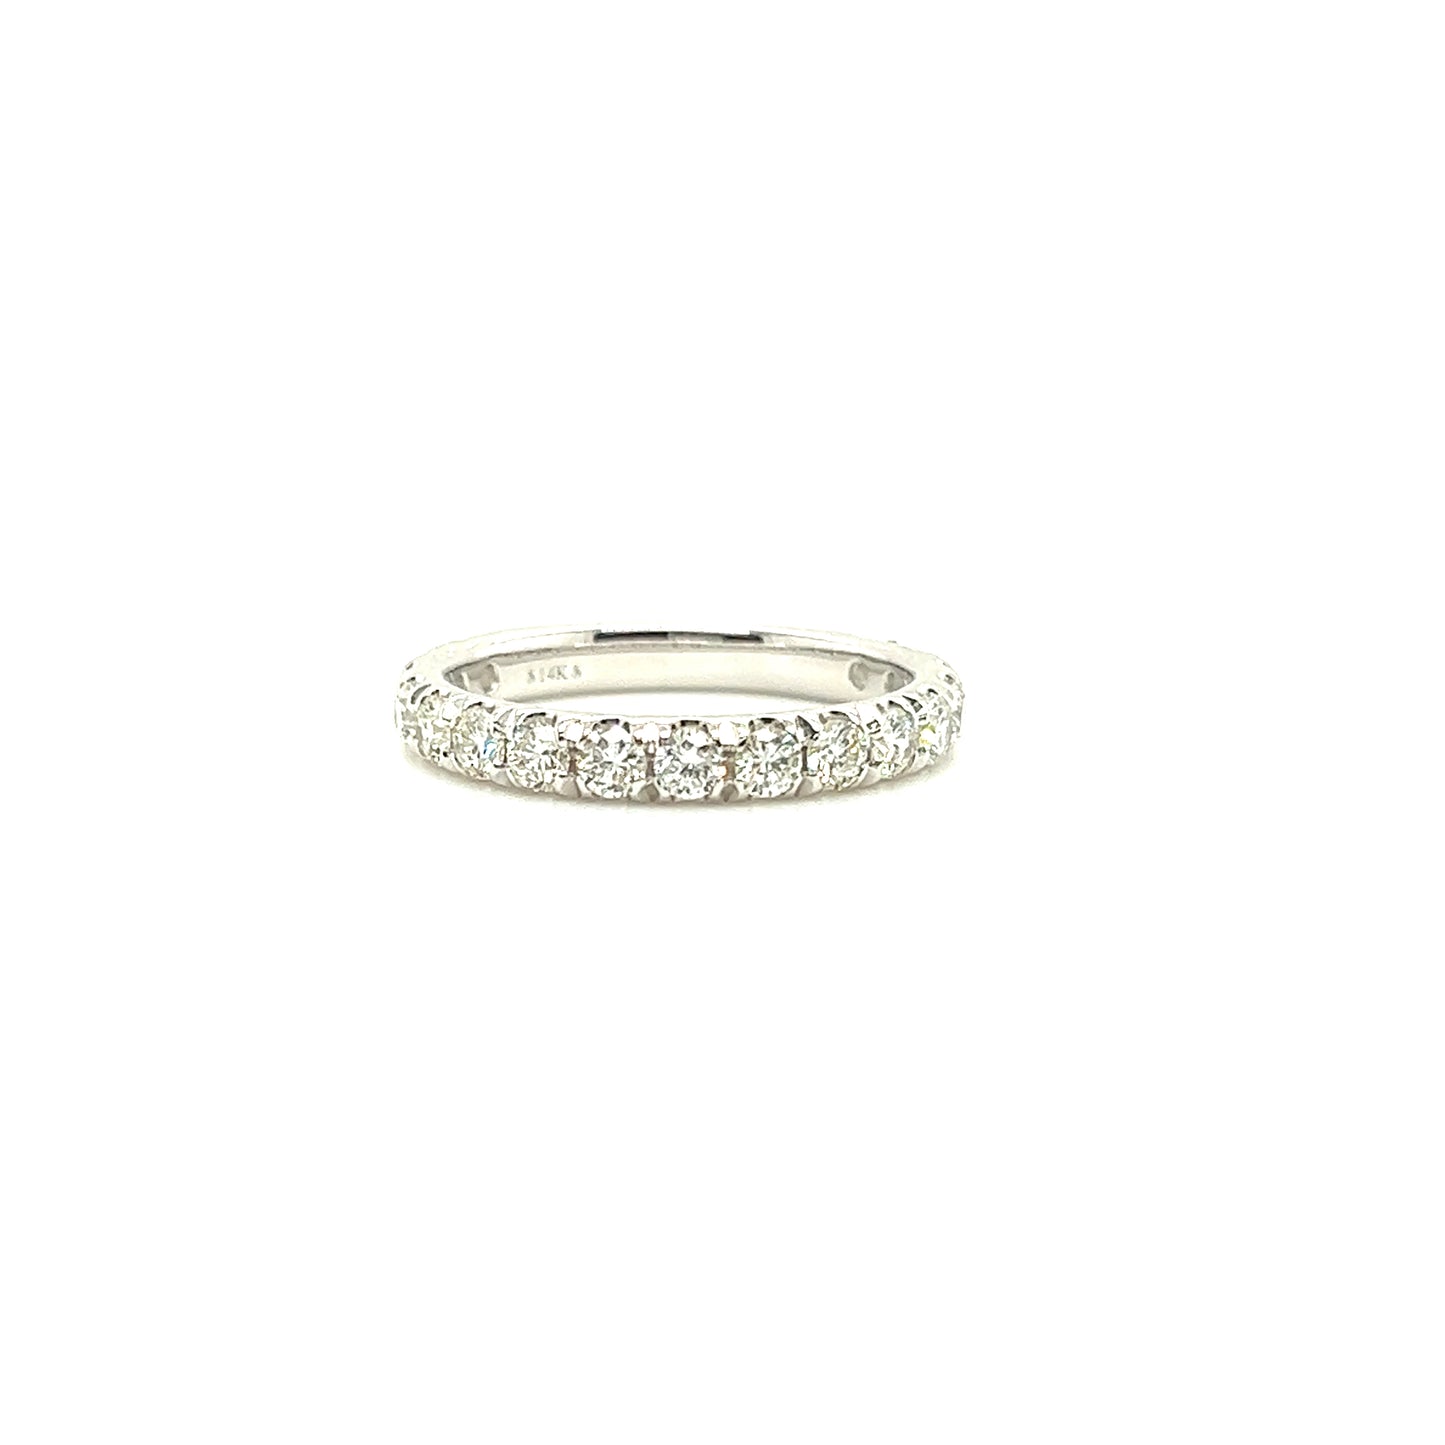 French-set Diamond Ring with 1ctw of Diamonds in 14K White Gold Front View